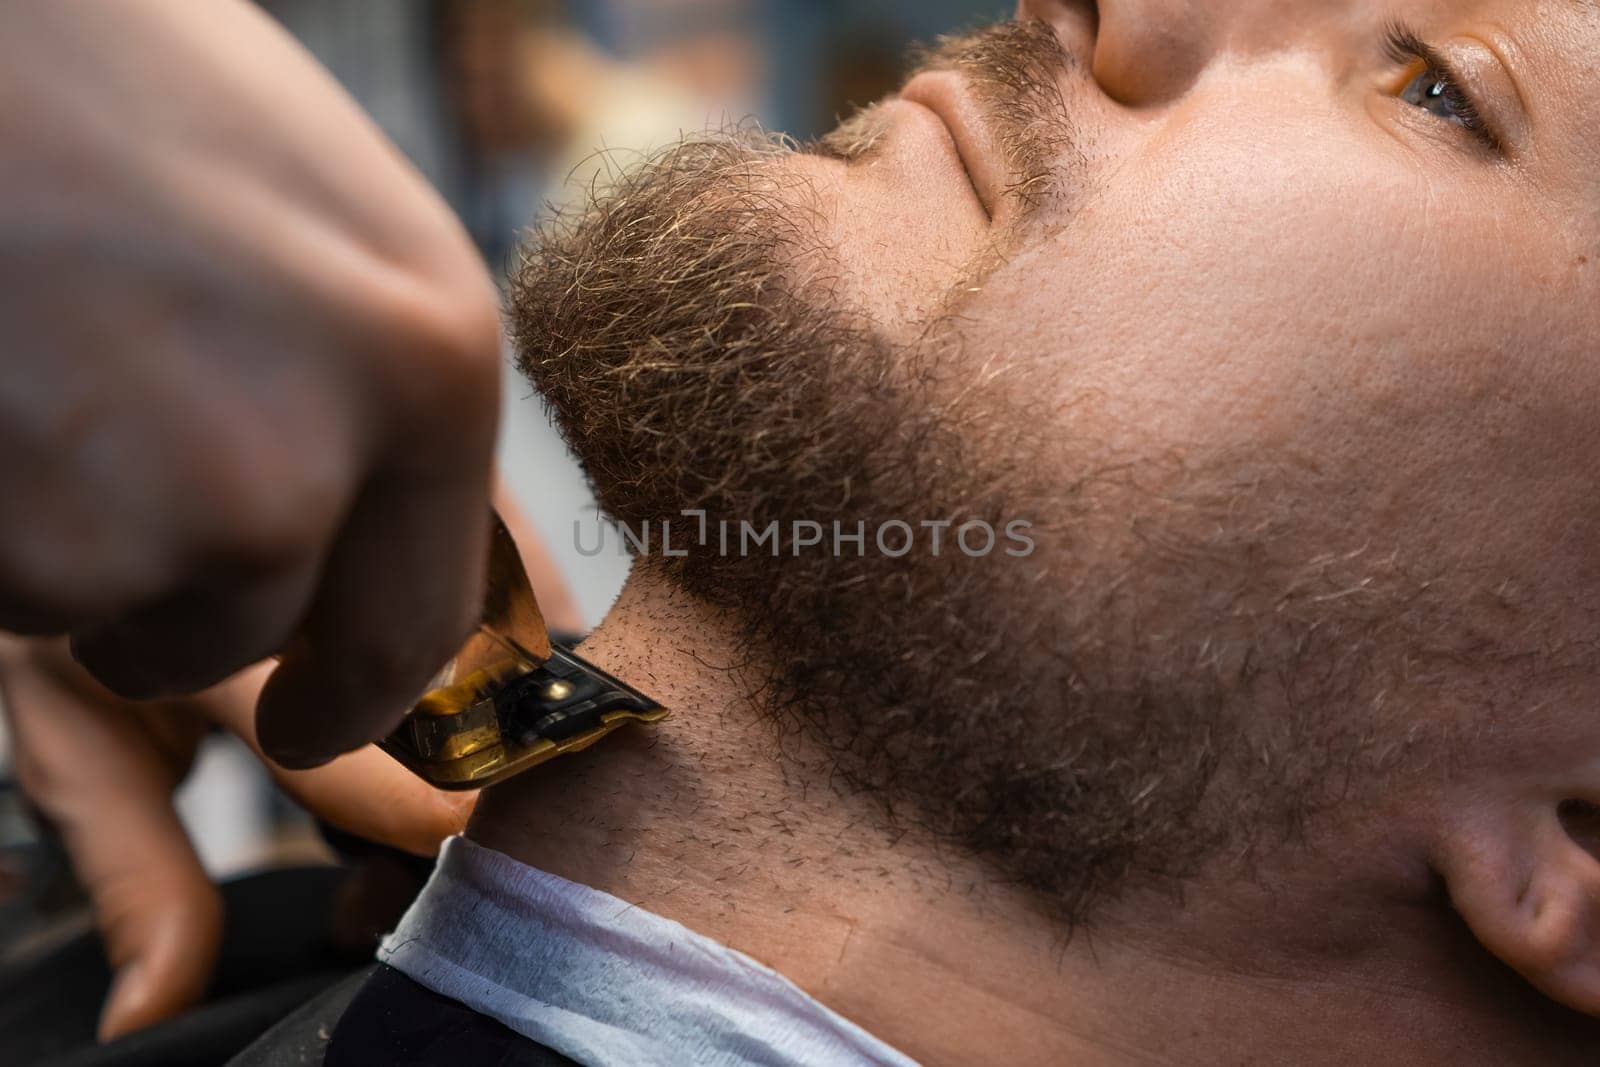 Master barber employs an automatic trimmer to groom the clients beard at the barbershop.